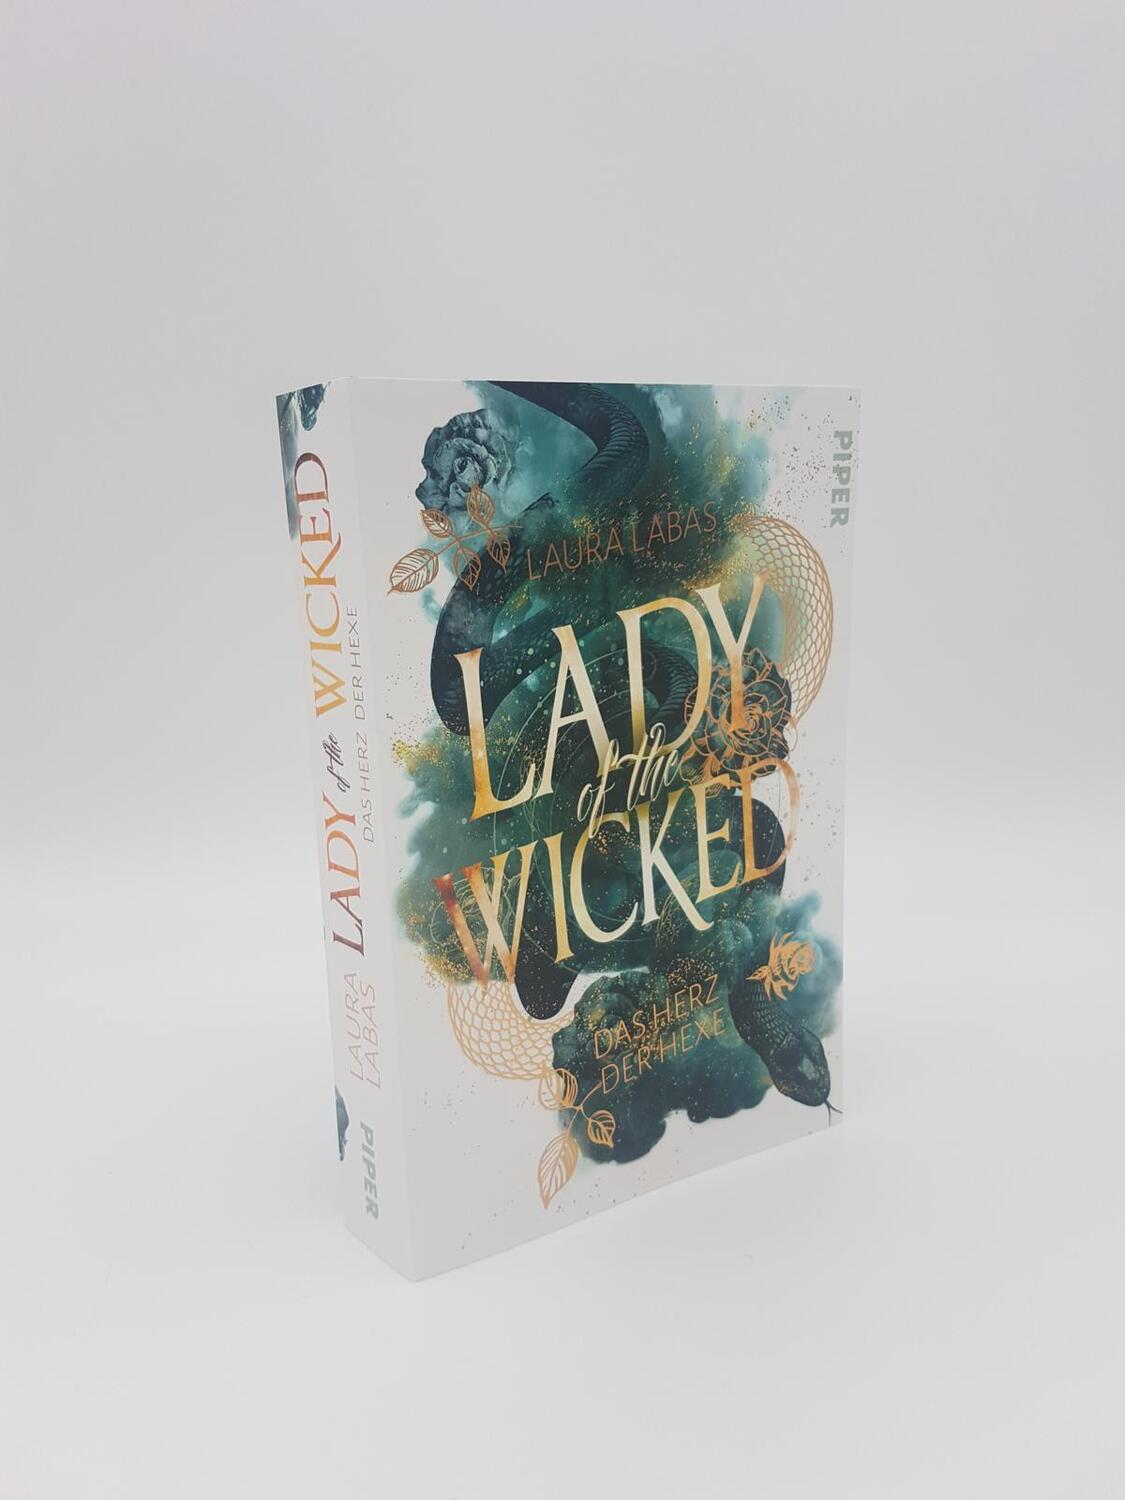 Bild: 9783492706414 | Lady of the Wicked | Laura Labas | Taschenbuch | Lady of the Wicked